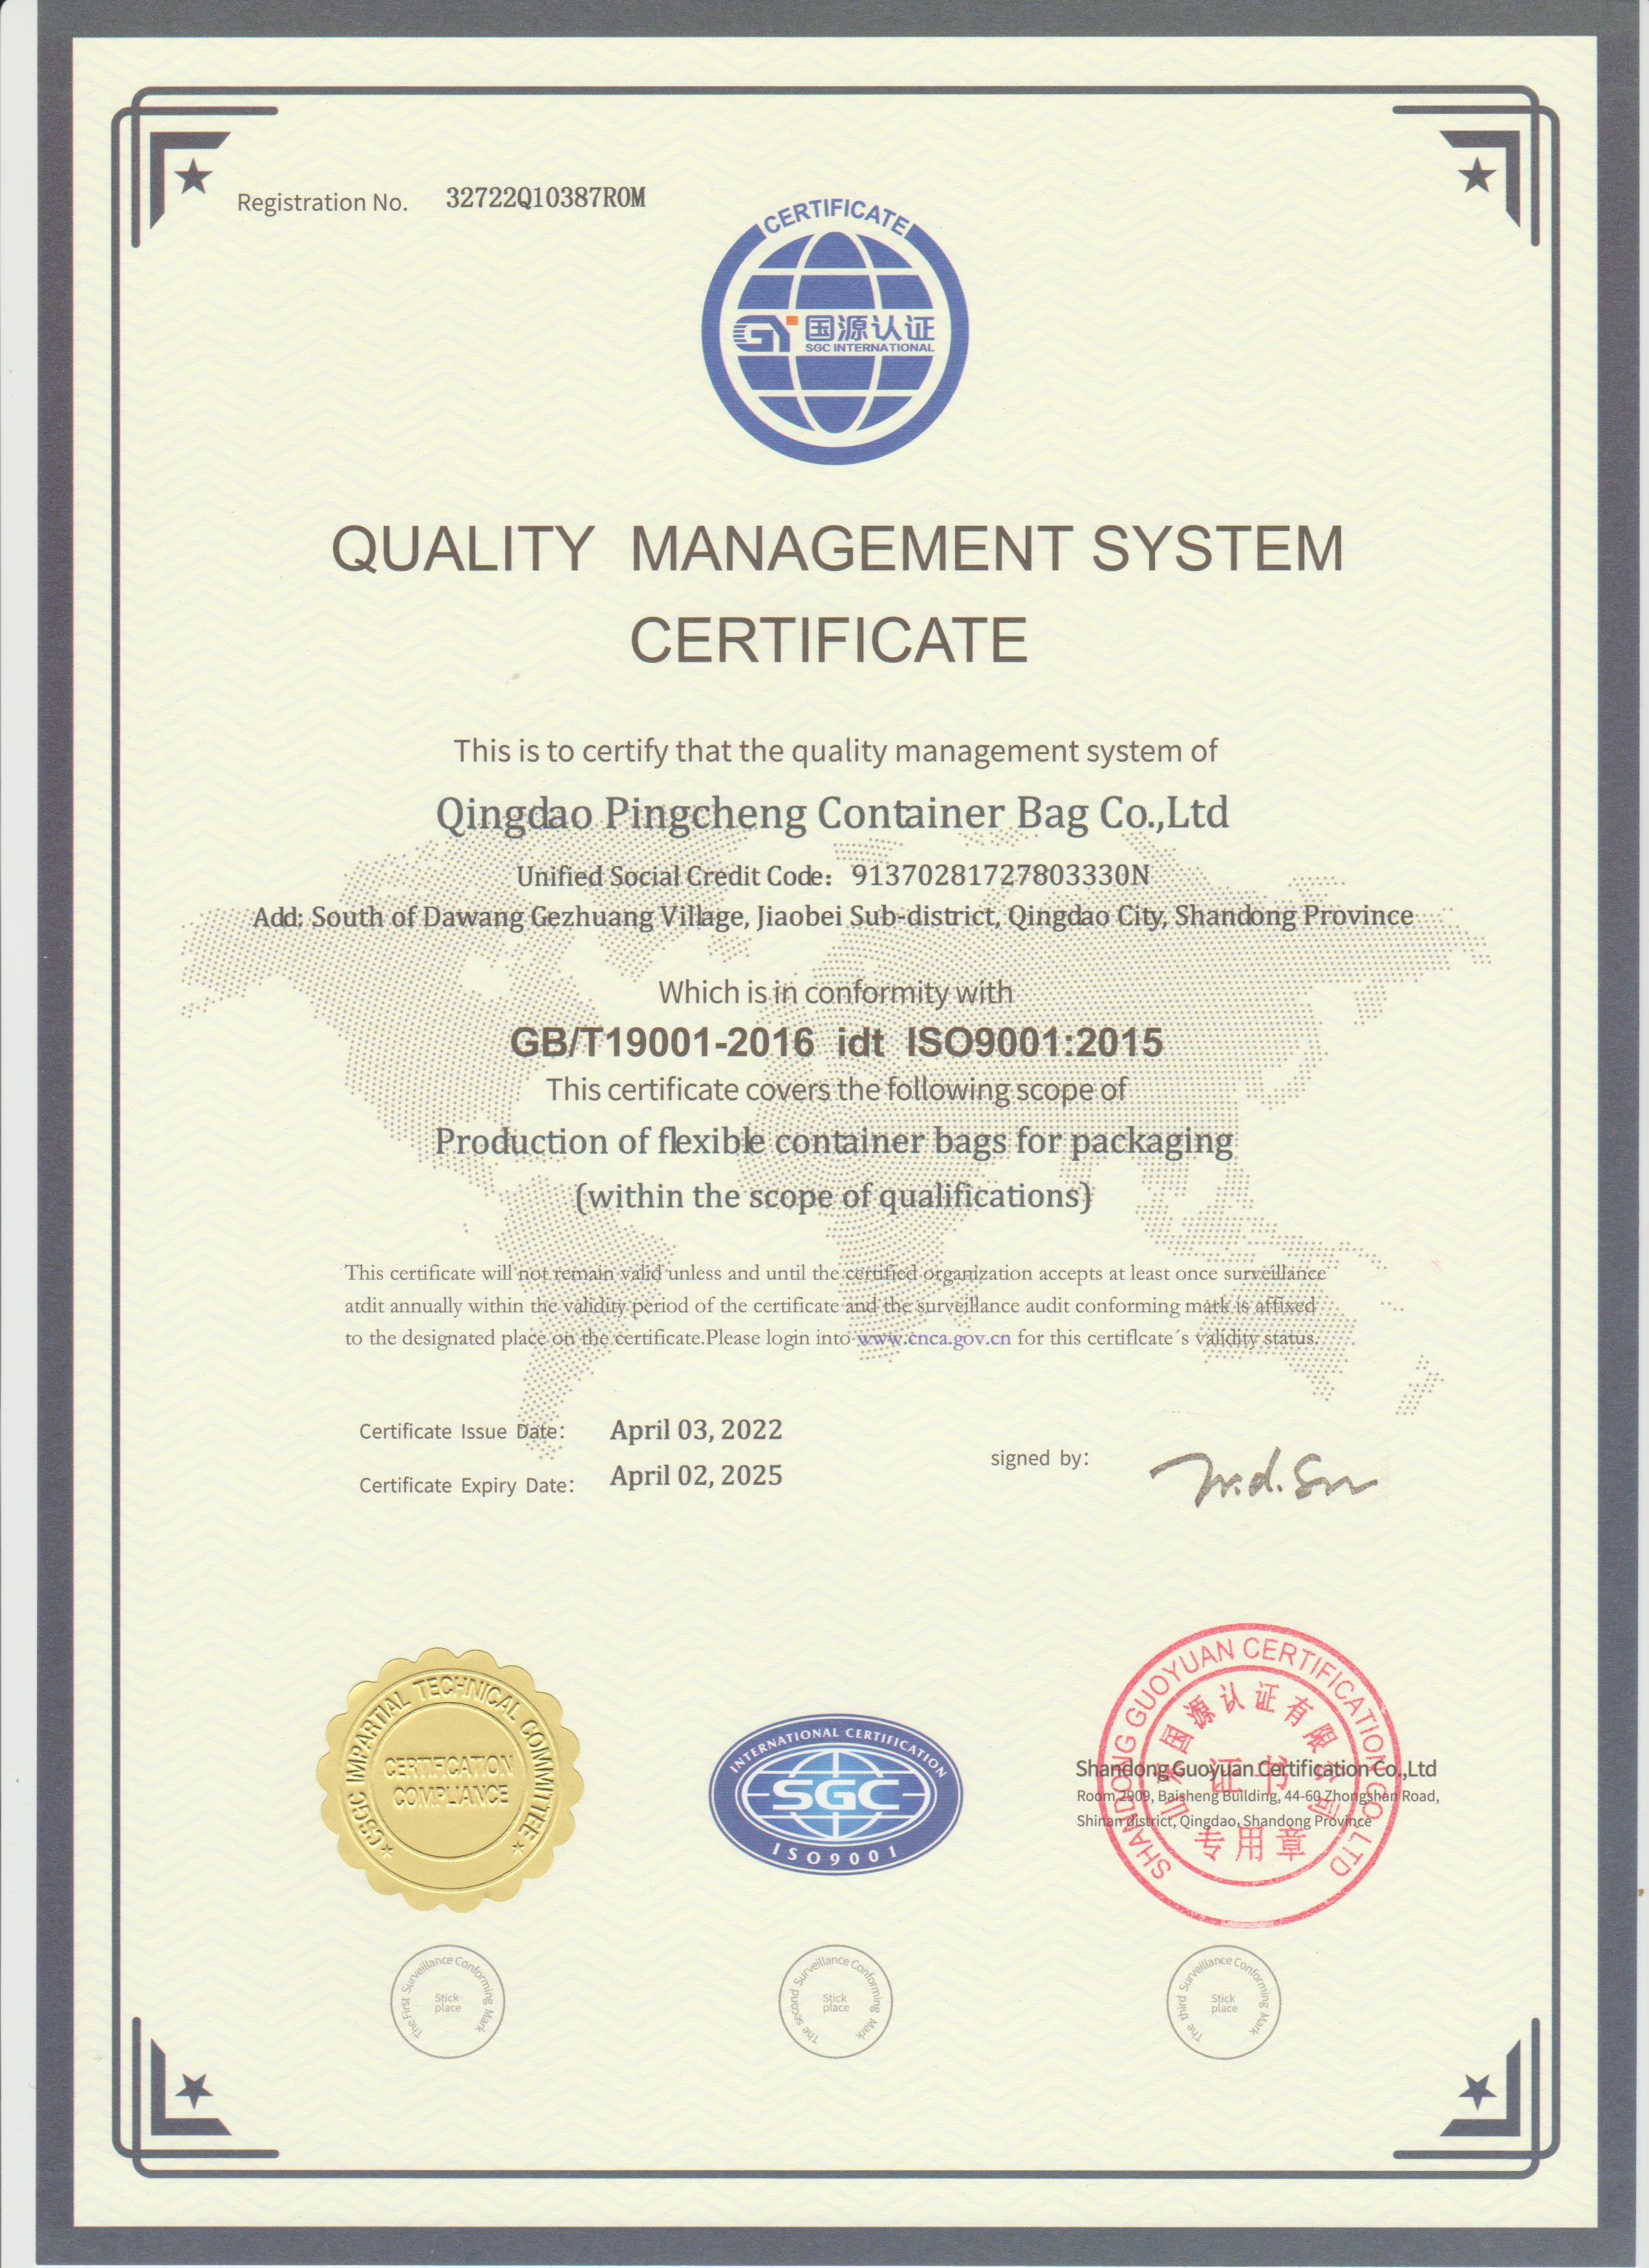 Quality management system certificate English